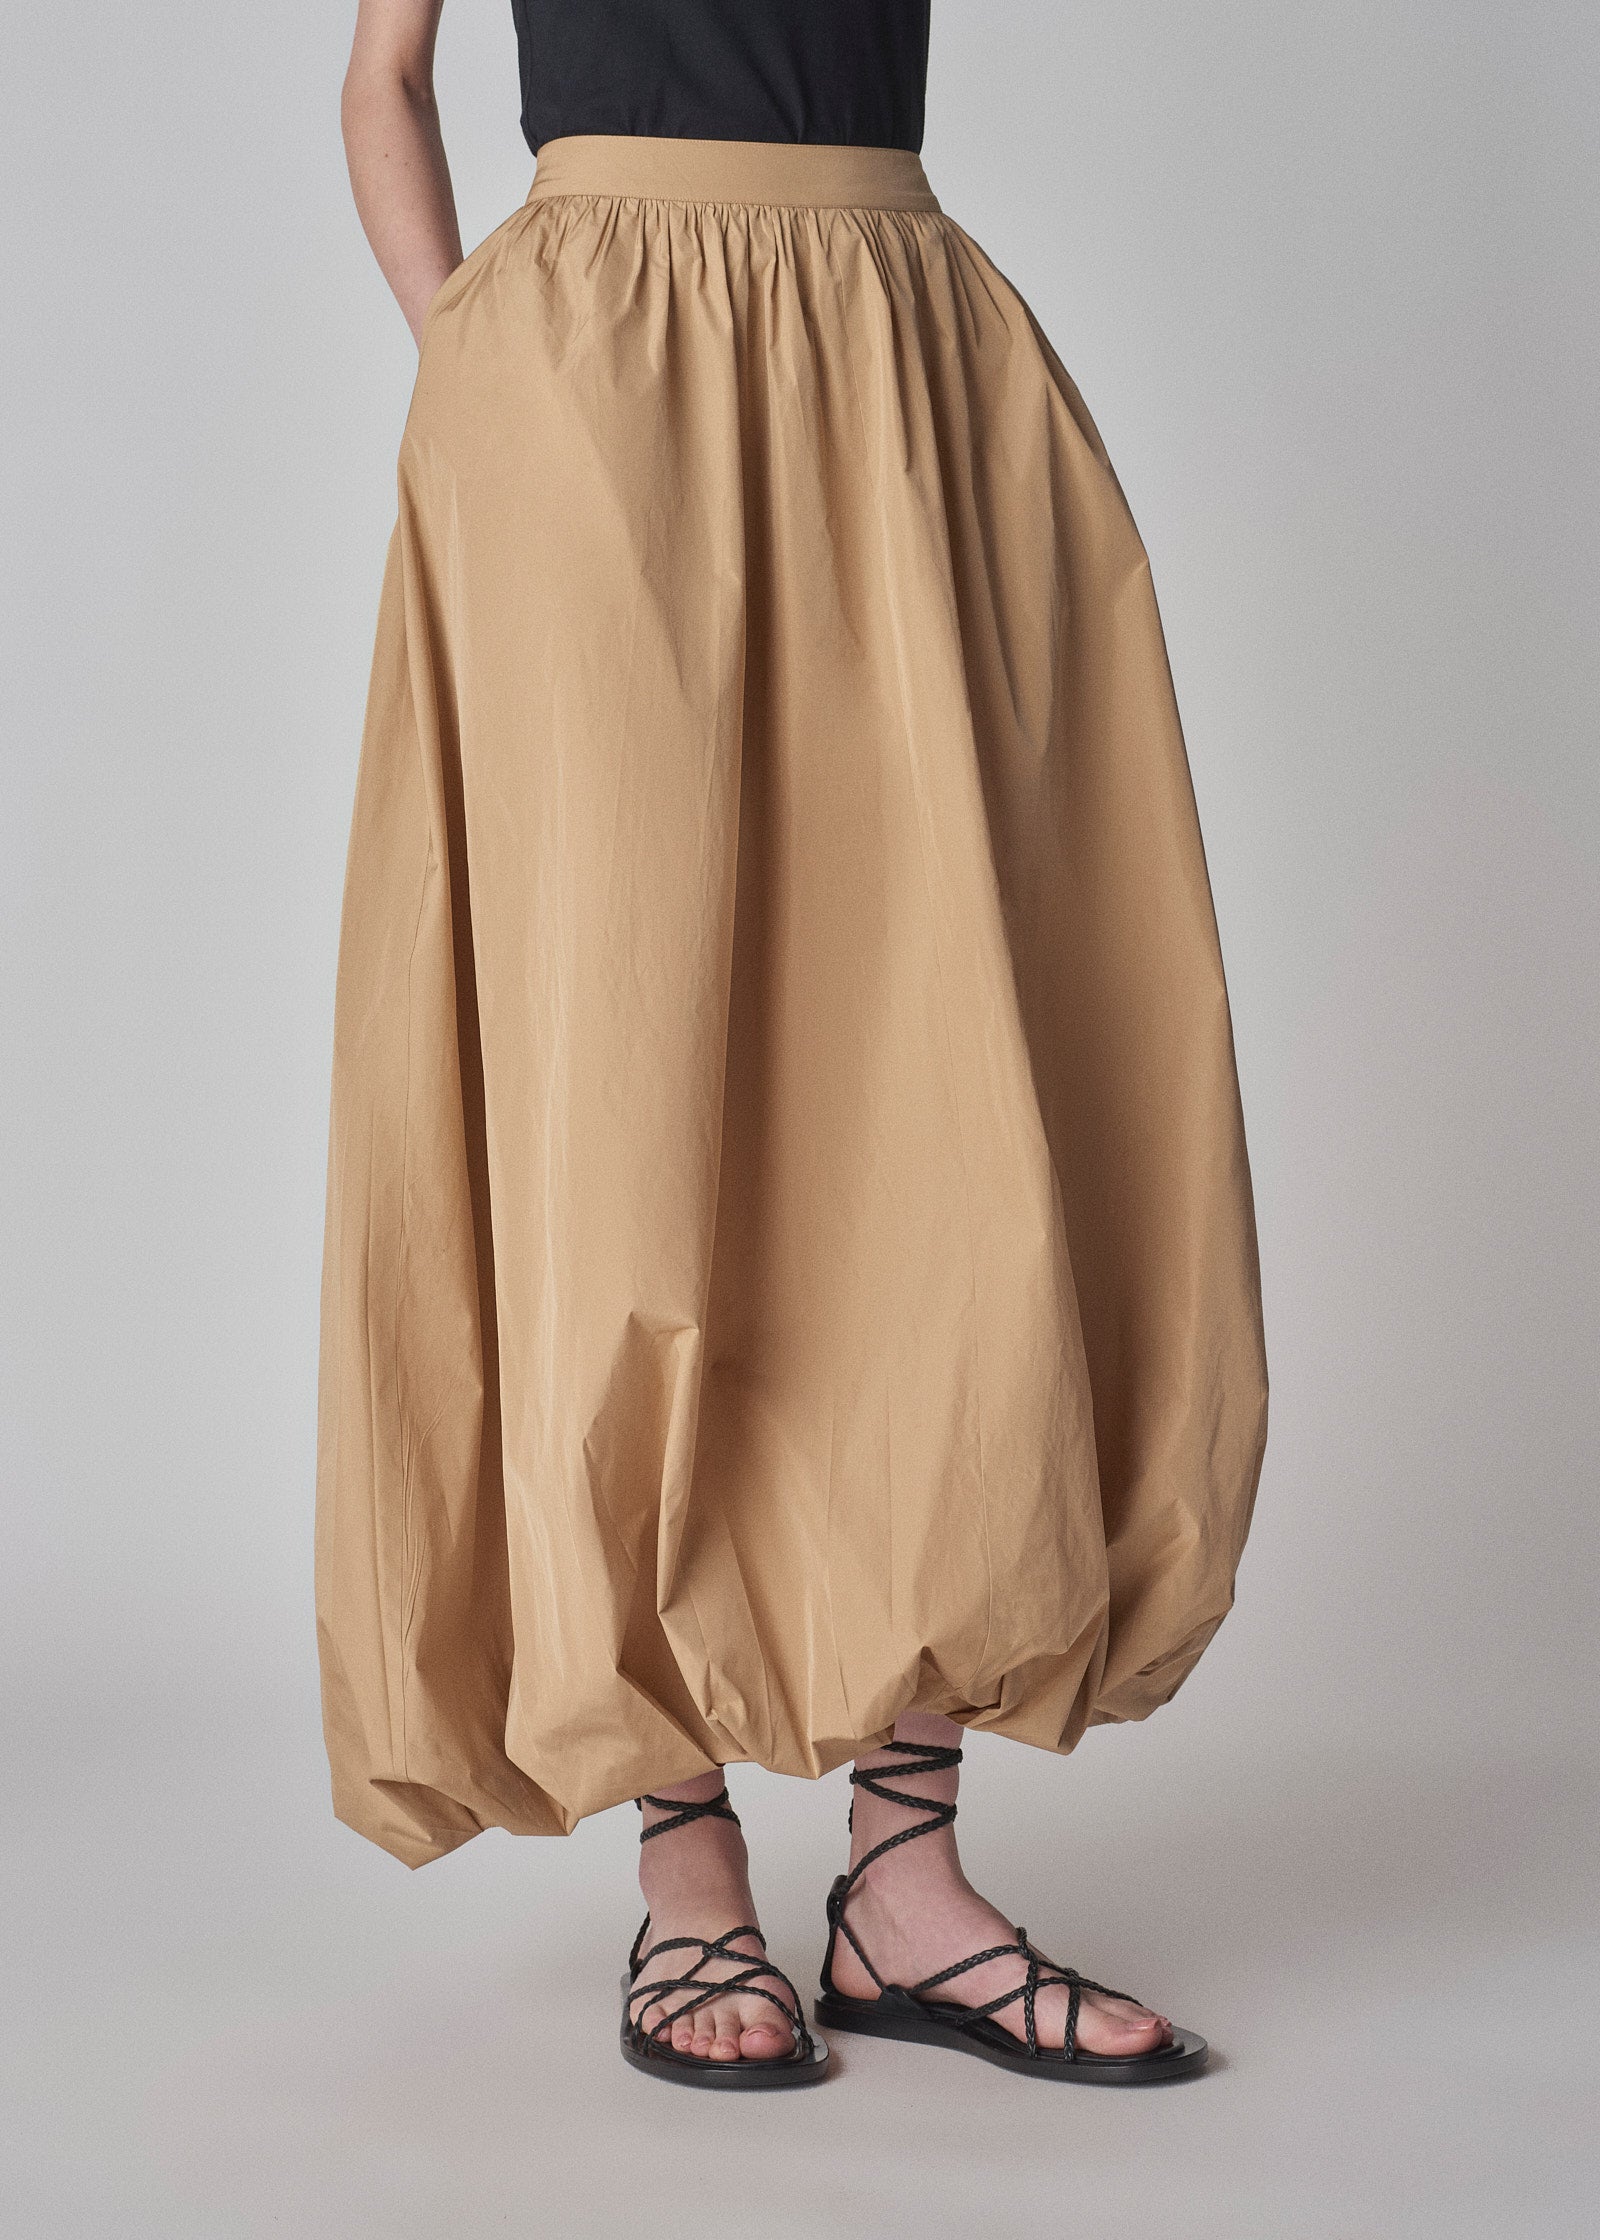 Volume Skirt in Taffeta - Camel - CO Collections